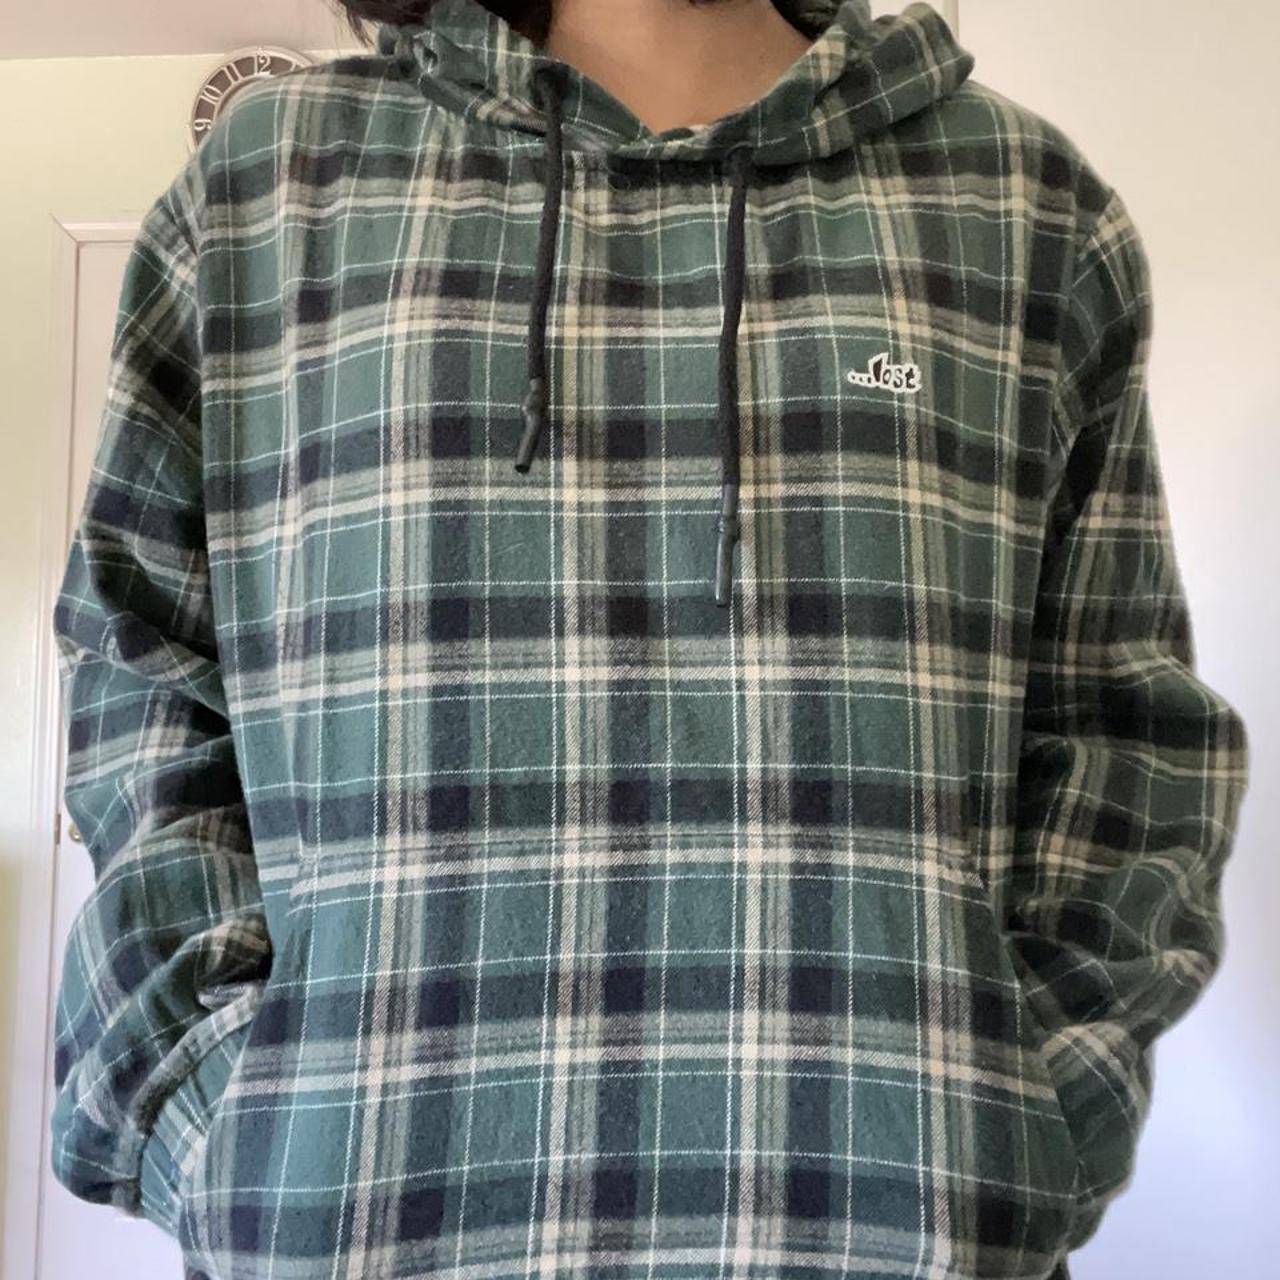 Product Image 1 - LOST skater brand green plaid